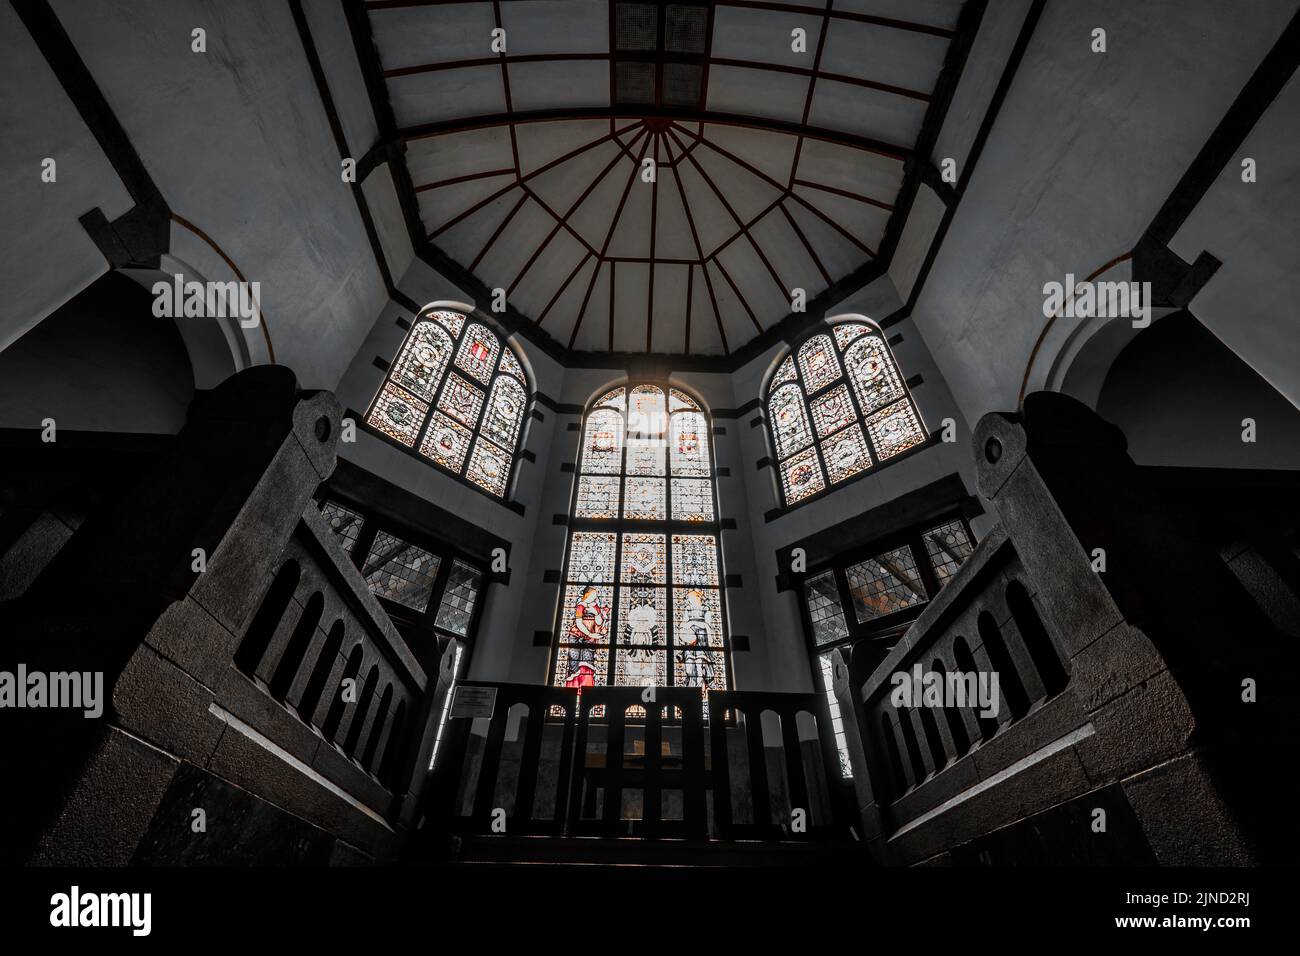 It can be concluded that the overall meaning of the painting contained in the stained glass in the Lawang Sewu building is the Netherlands which is de Stock Photo